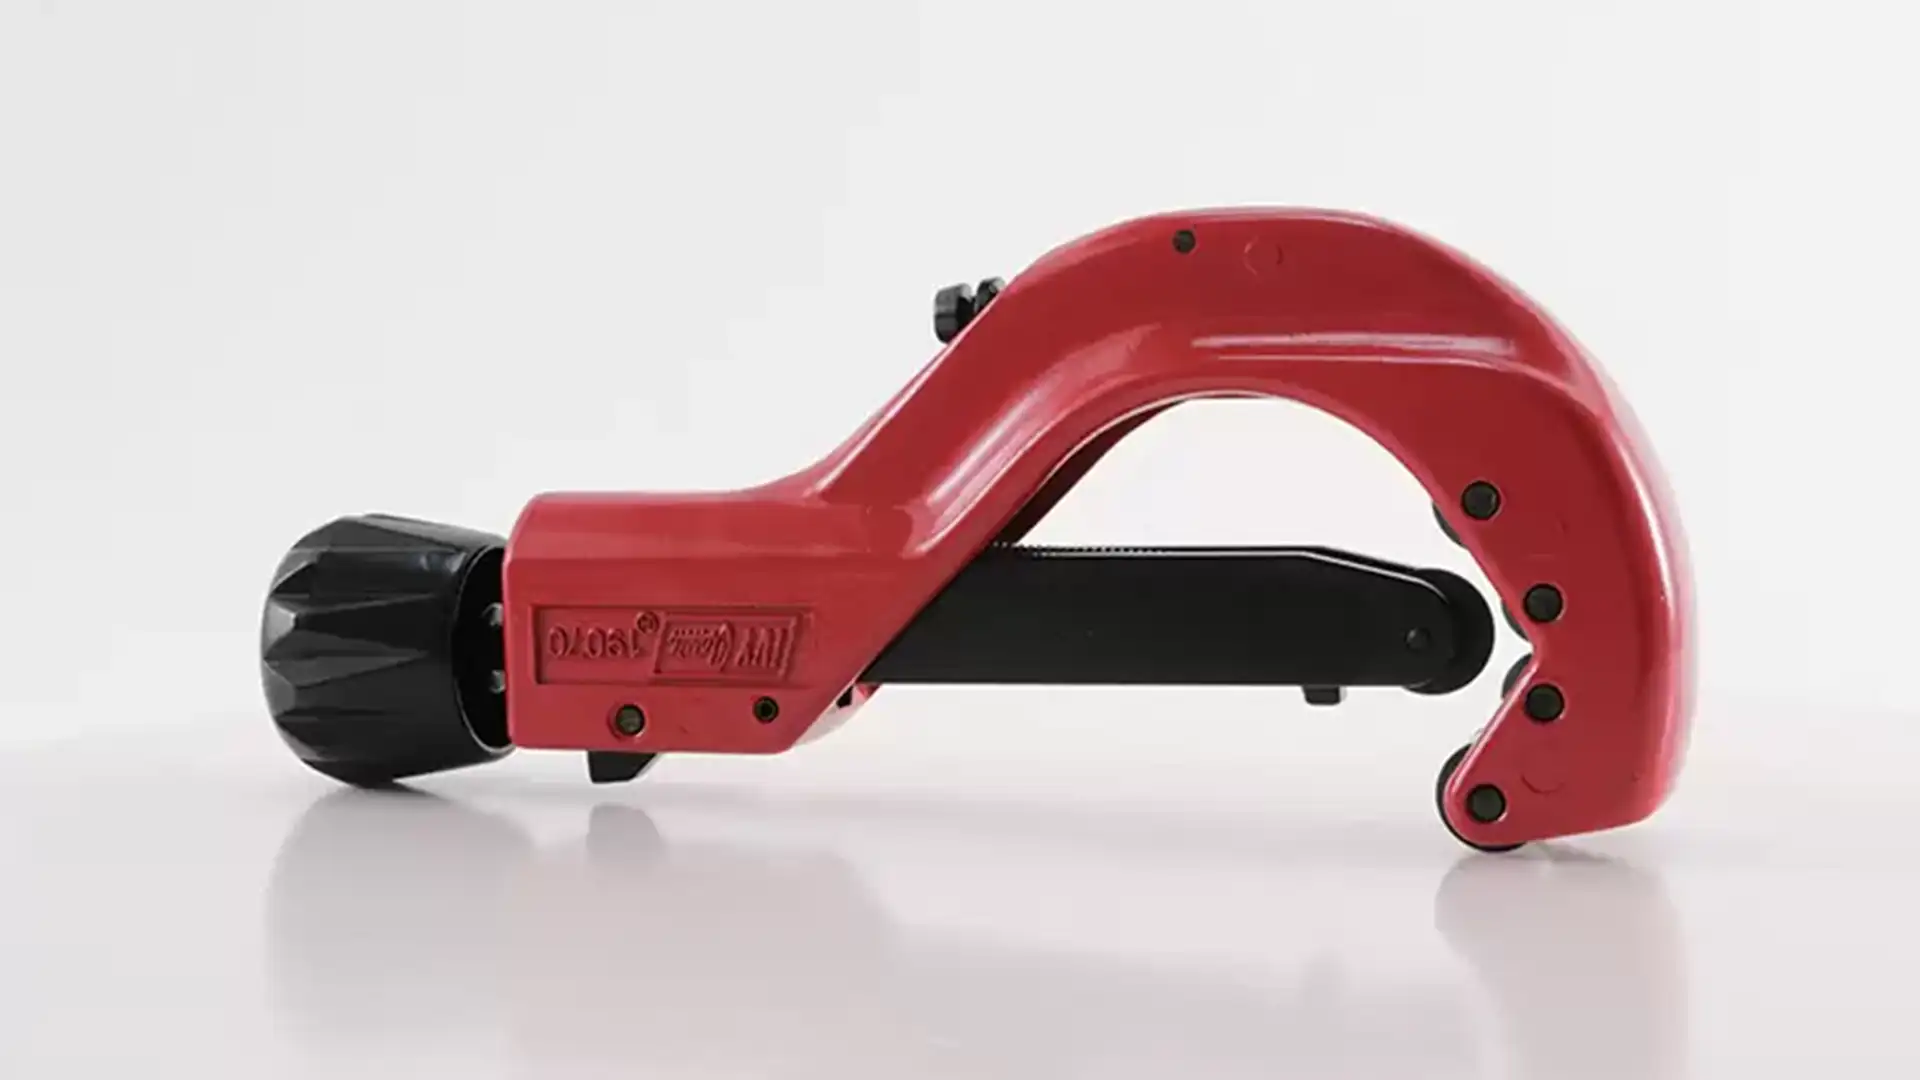 Product shot of red pipe cutter.